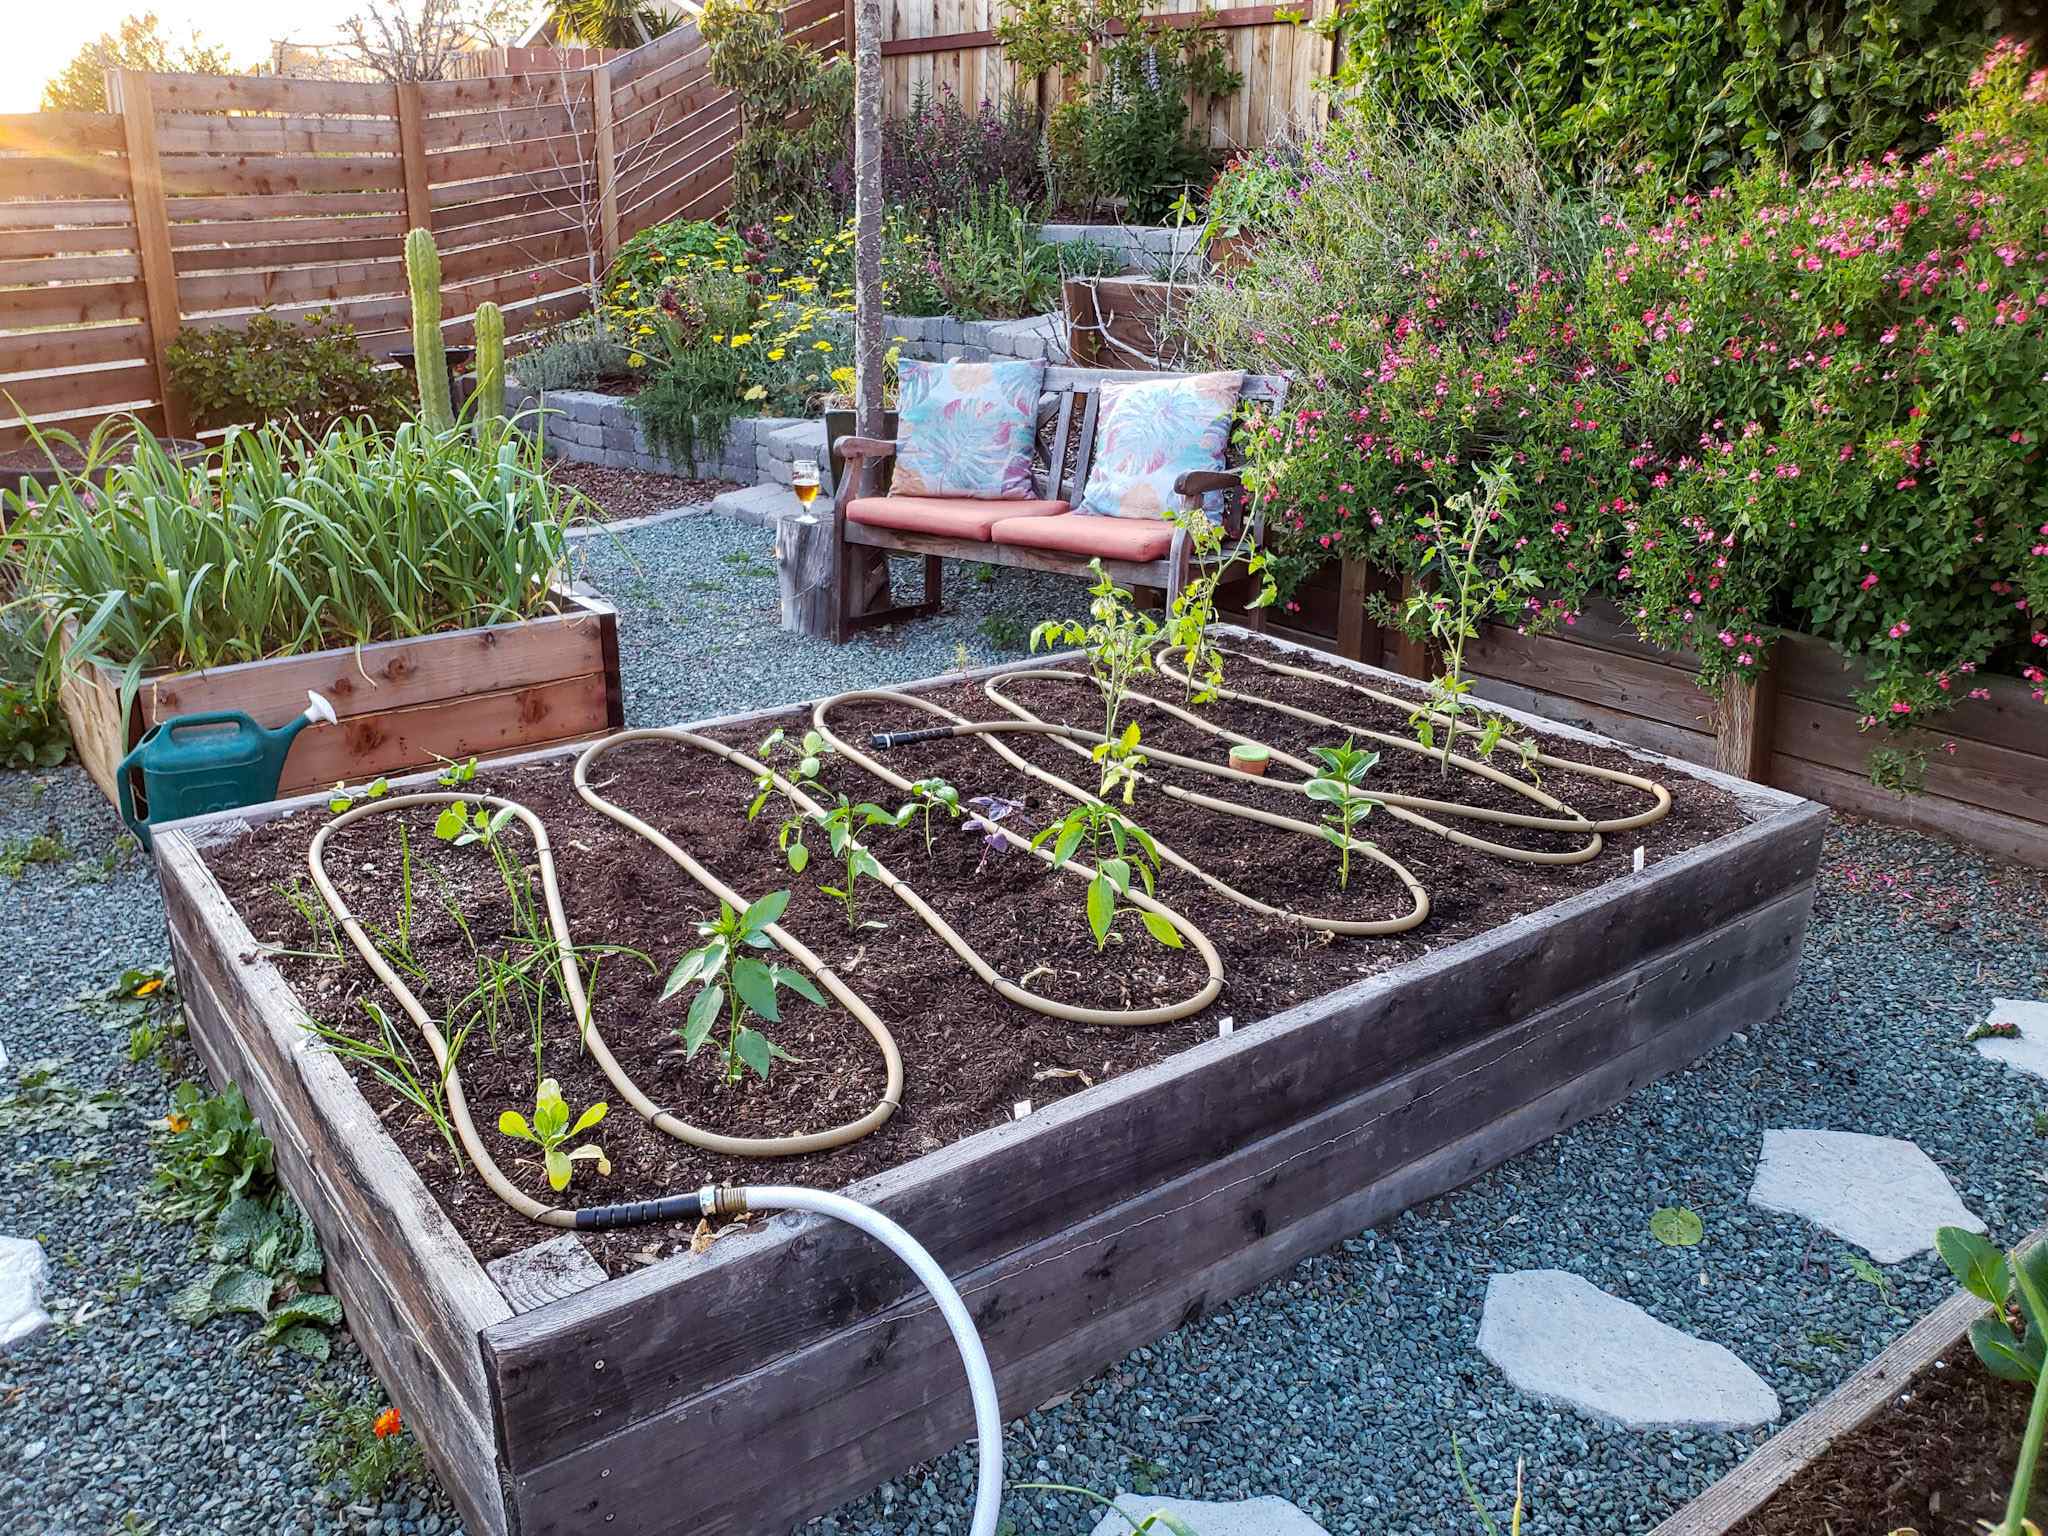 A large raised garden bed is shown with freshly planted pepper, tomato, basil, and onion seedlings. A soaker hose has been laid out equally along the soil surface in a snake like fashion. There is a garden hose plugged into the soaker hose, a watering can sitting next to a raised bed full of garlic that is immediately behind the featured garden bed. There is a horizontal board fence with the setting sun rays streaming over the top of the fence, along with perennials, cacti, trees, and vines around the perimeter of the area.